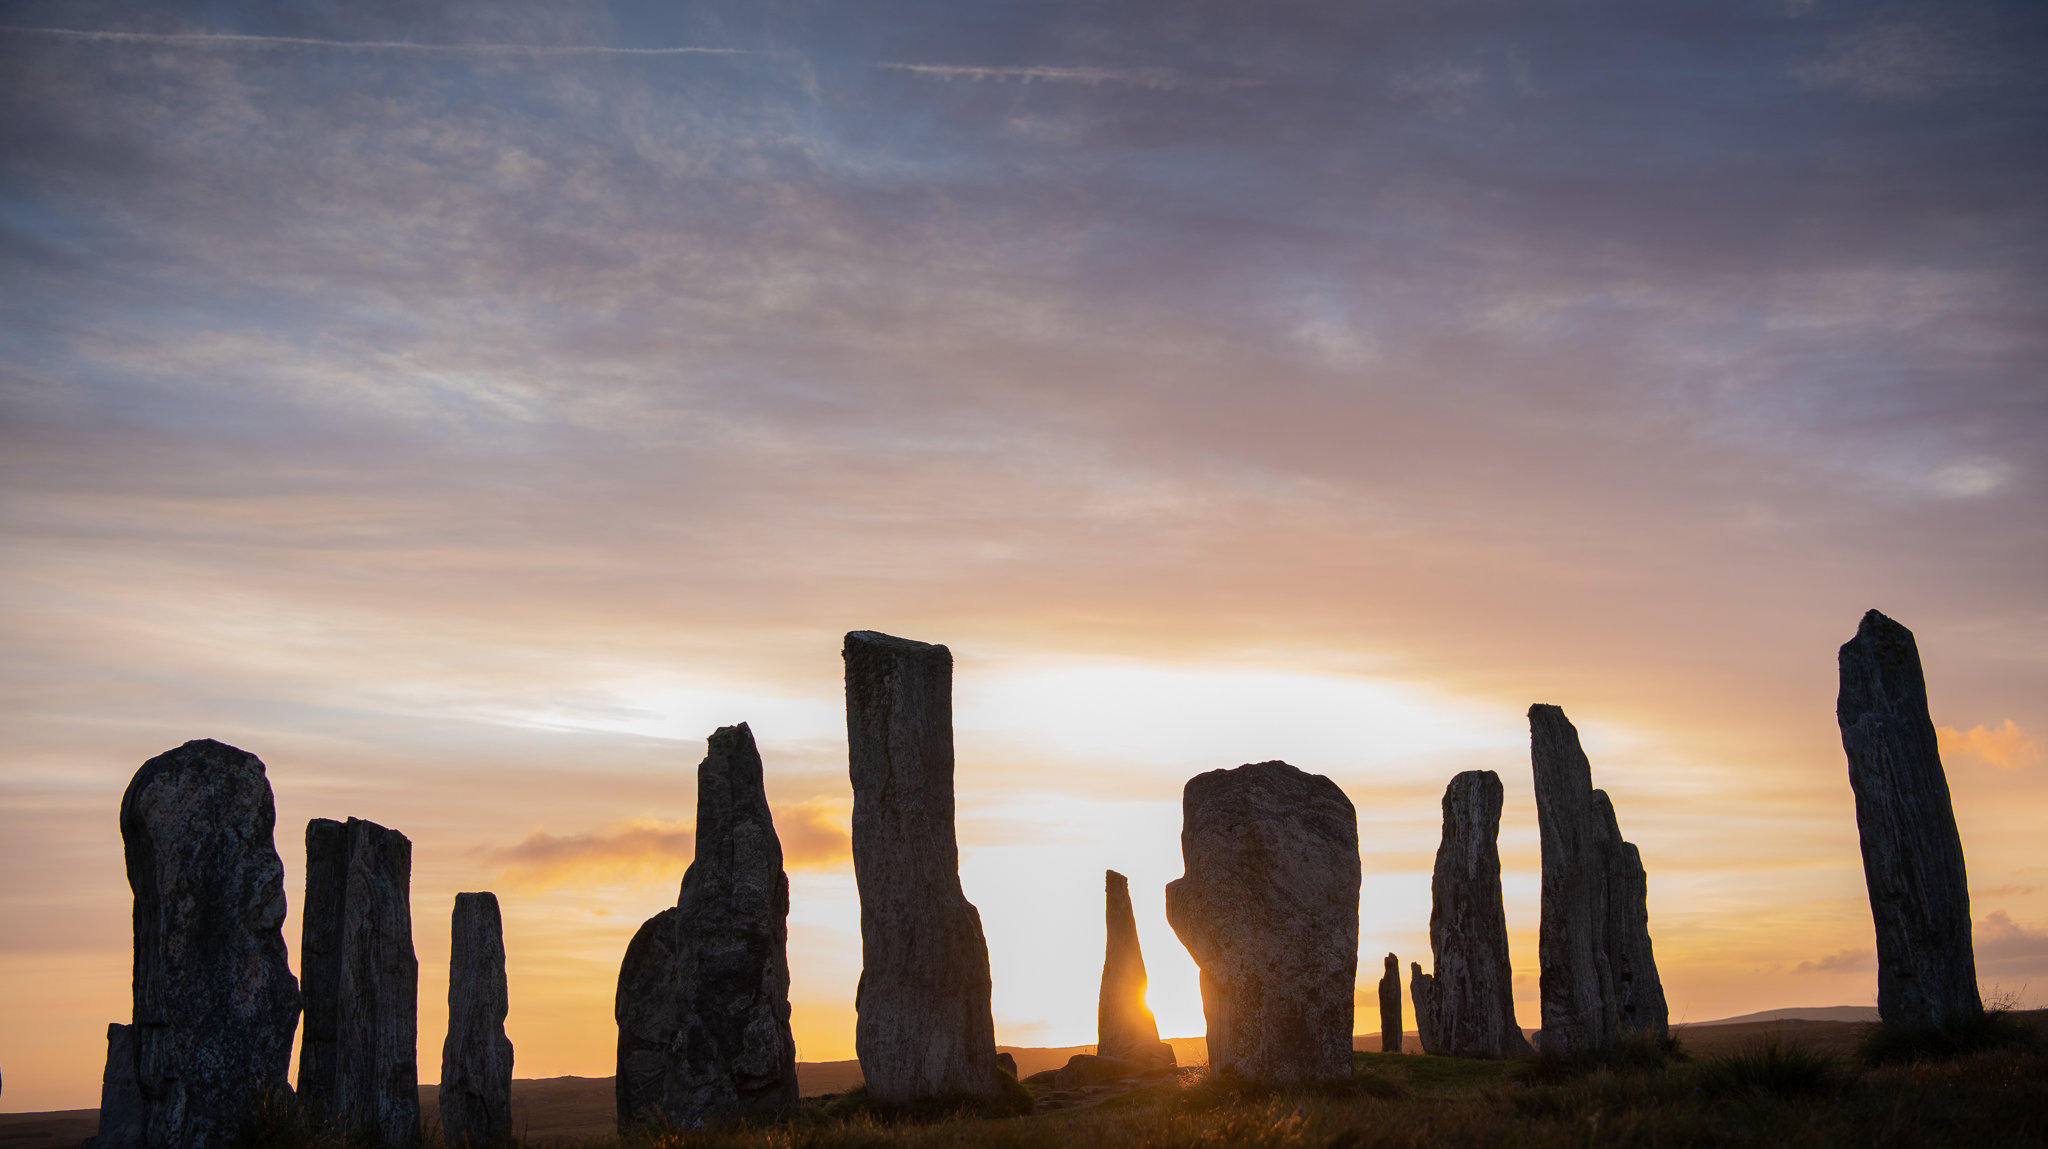 The standing stones of Callanish at dawn